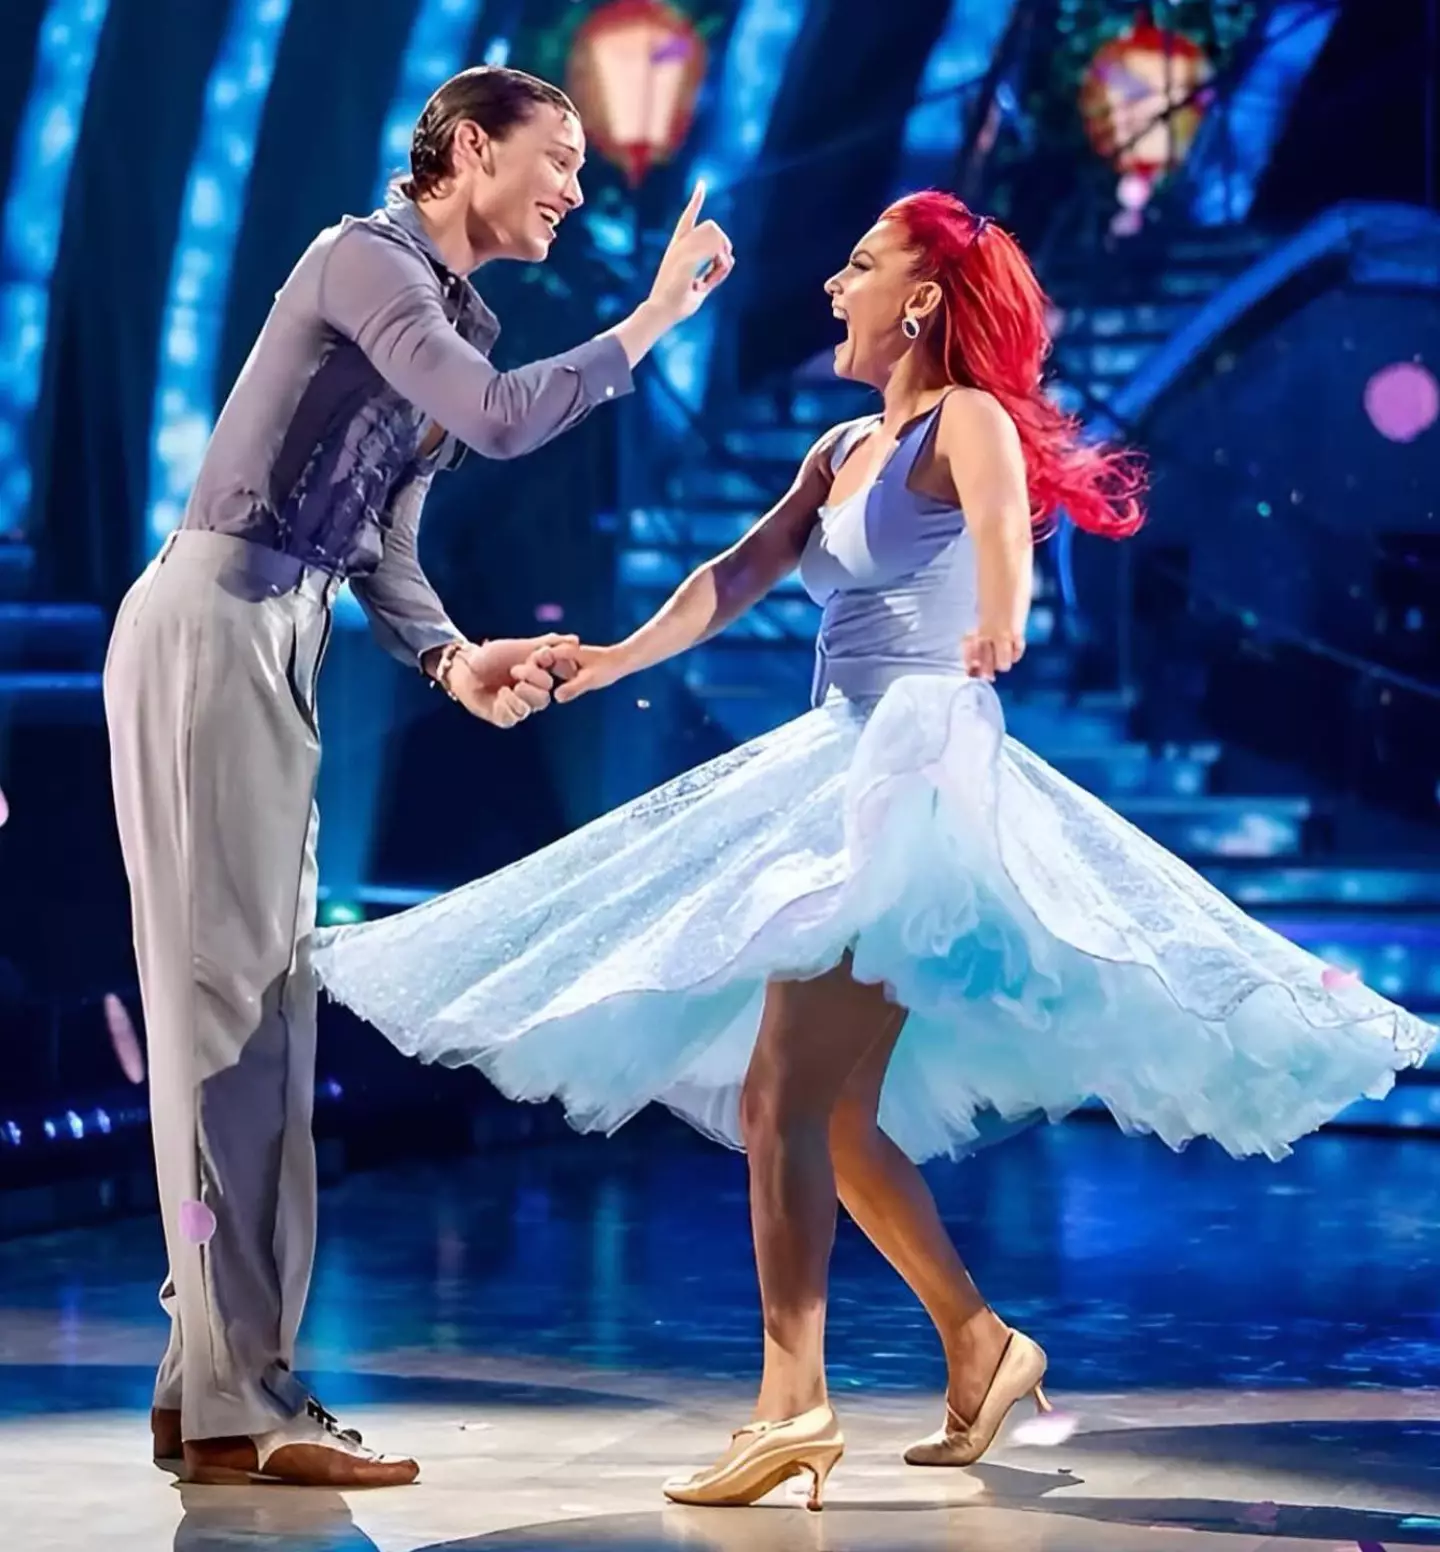 EastEnders star Bobby Brazier and his dance partner Dianne Buswell.